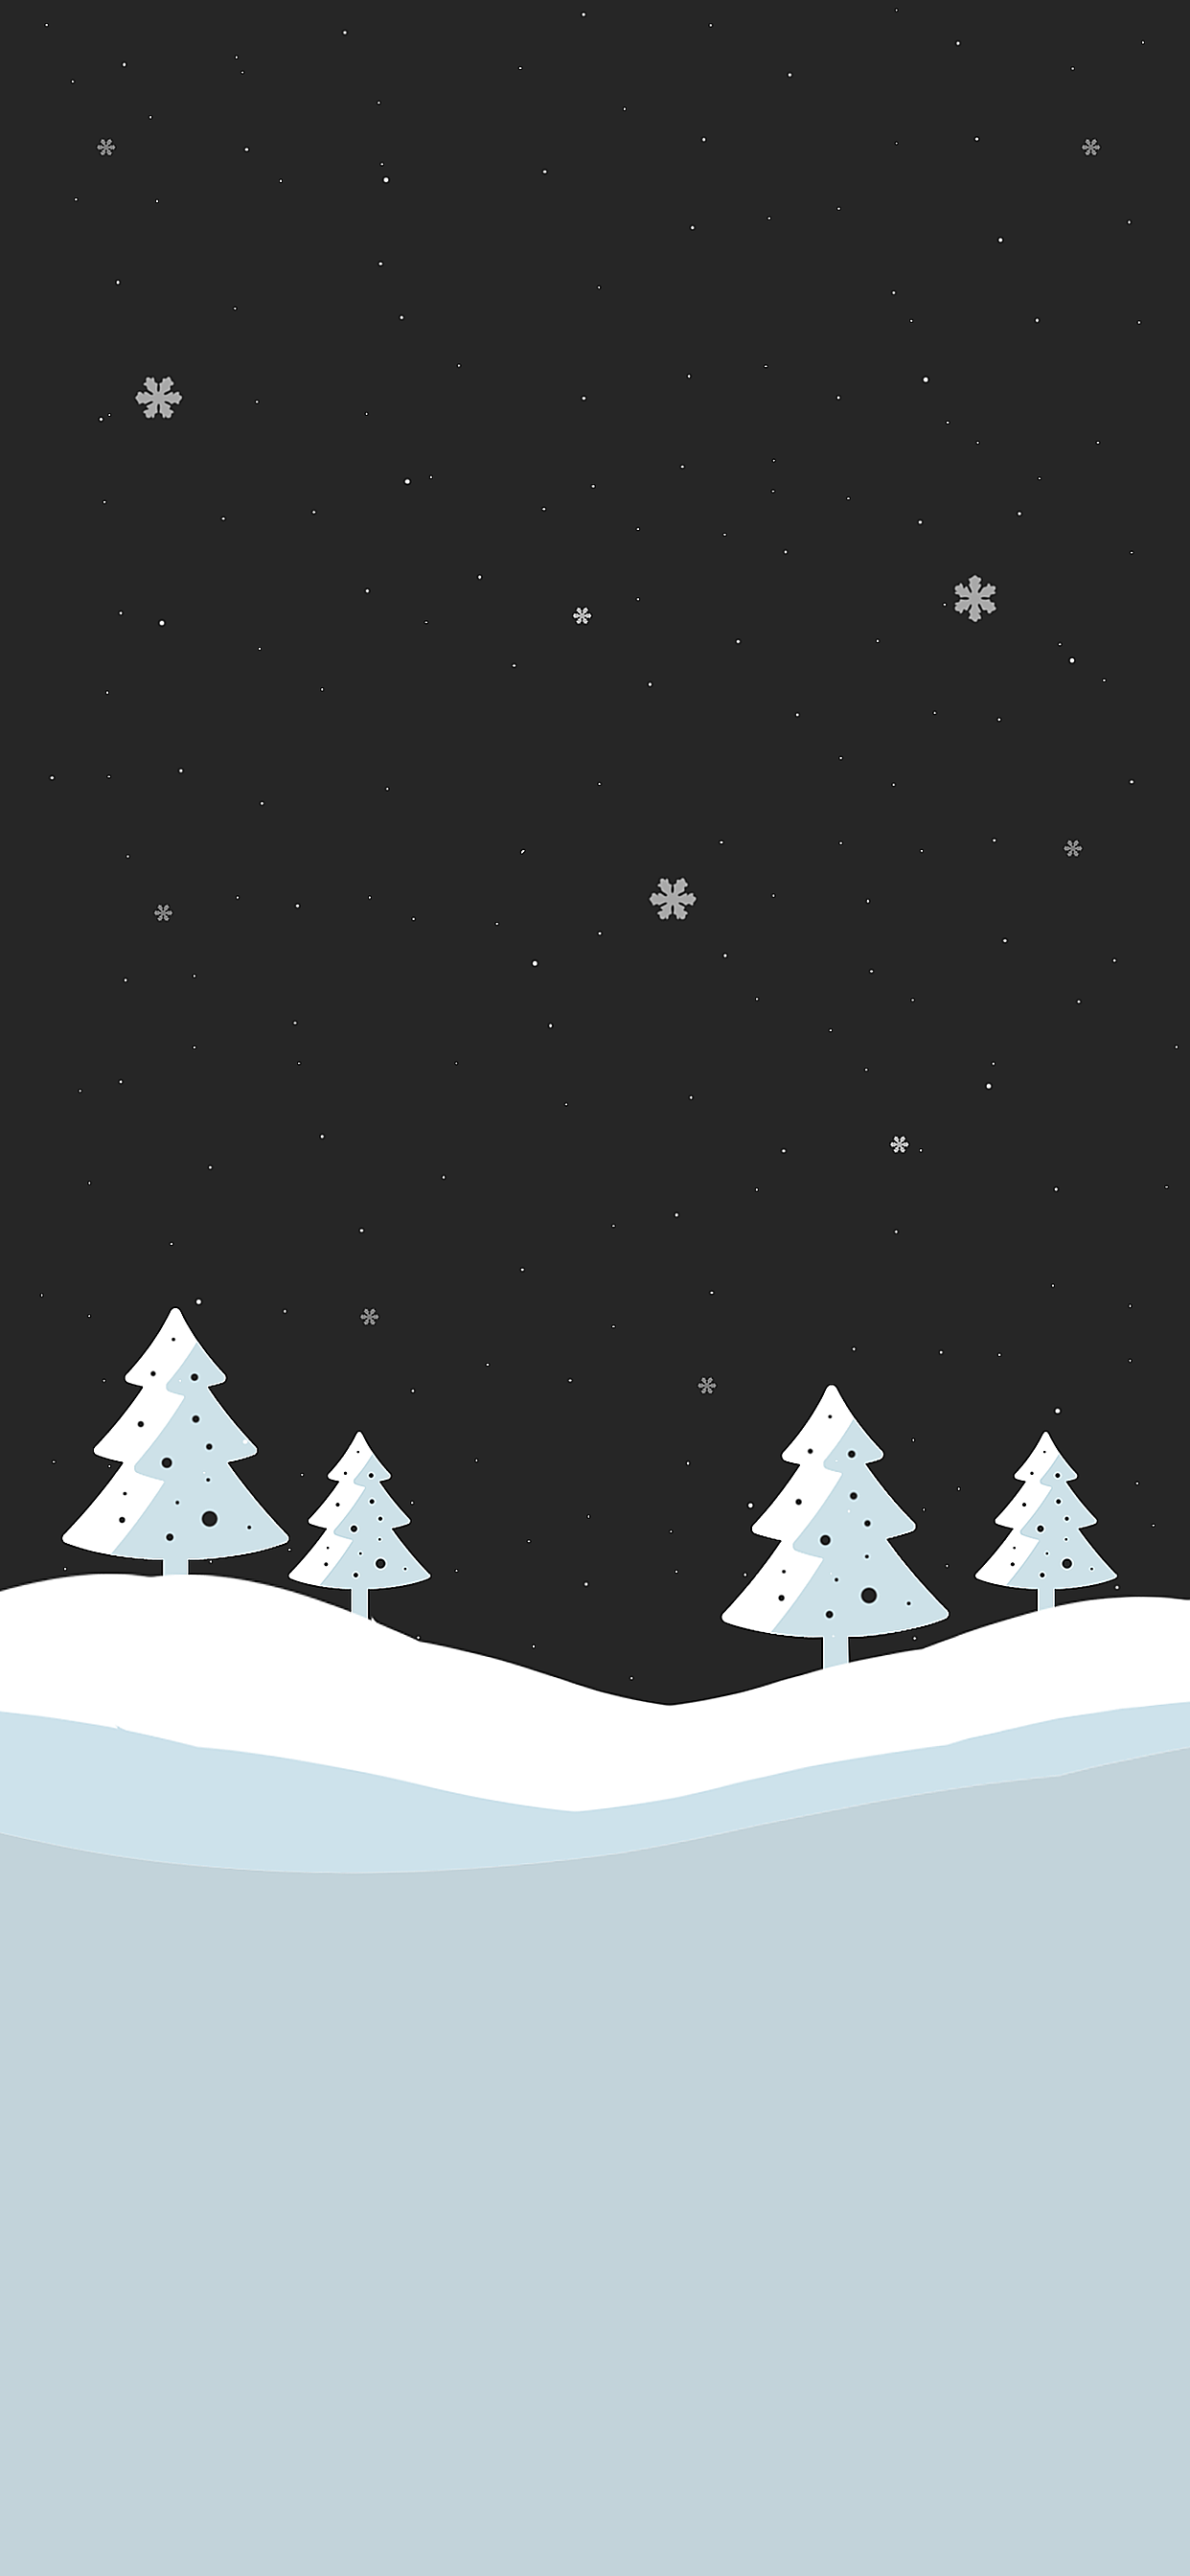 Snowy winter Christmas wallpaper for iPhone